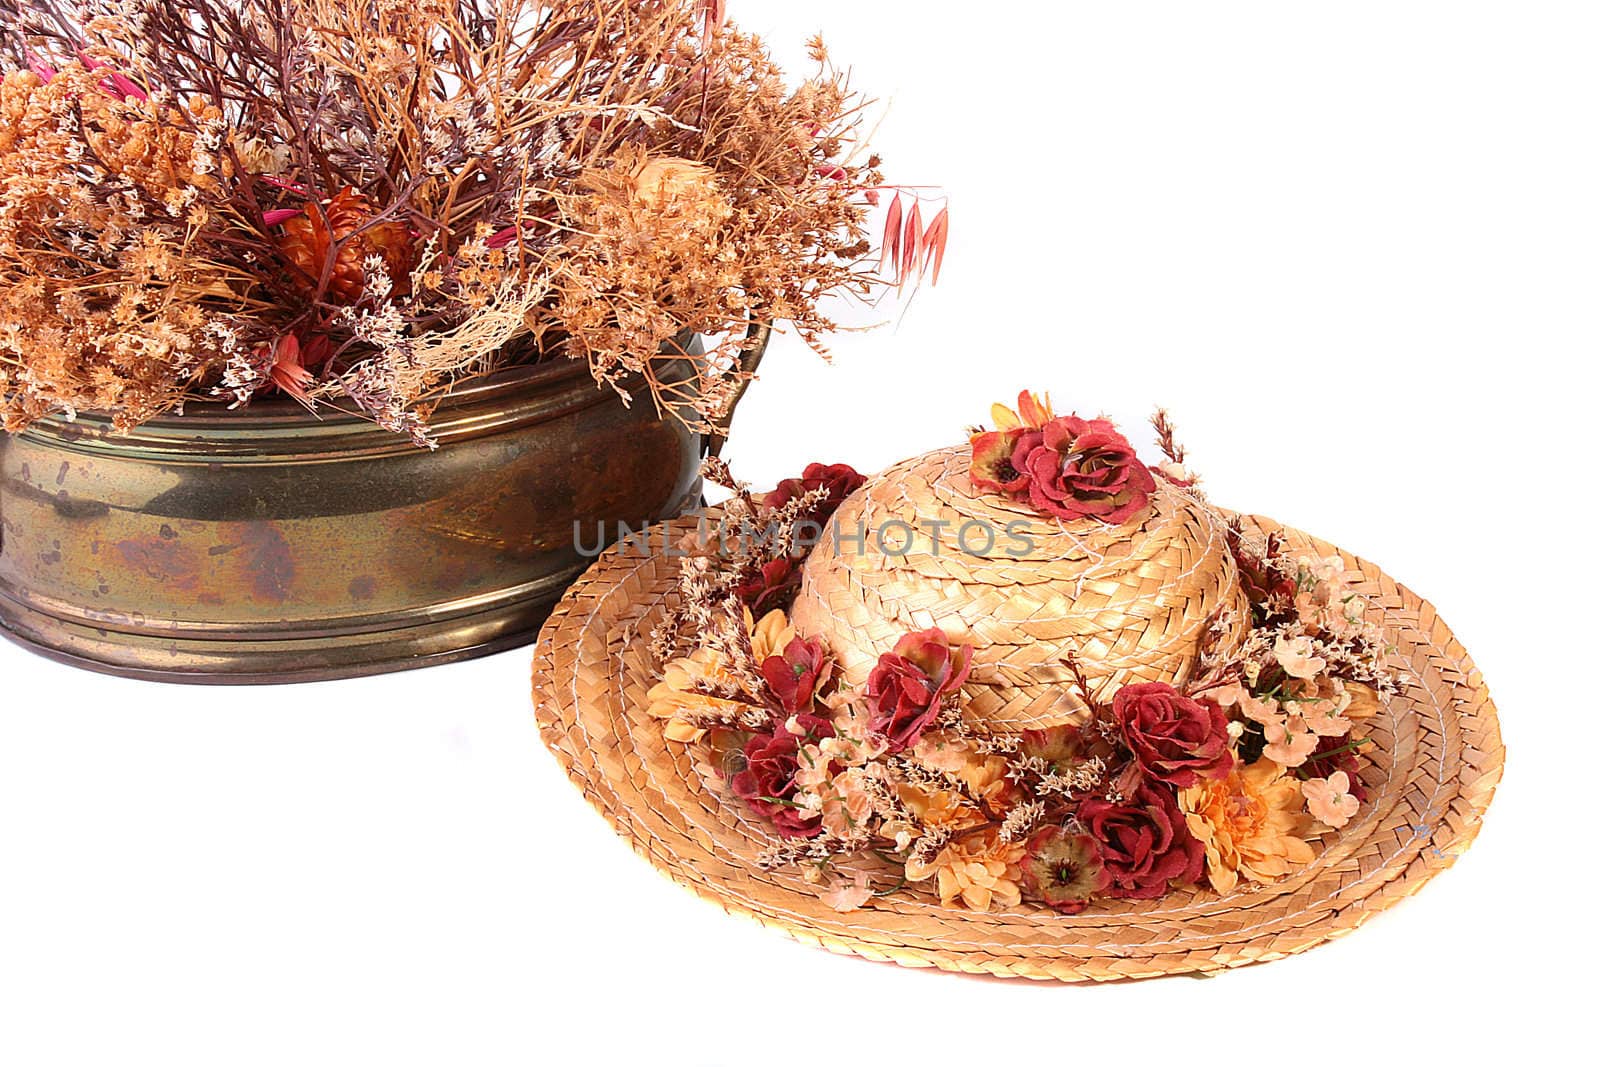 Straw hat with autumn colours and a metal vase with an autumn dry bouquet.